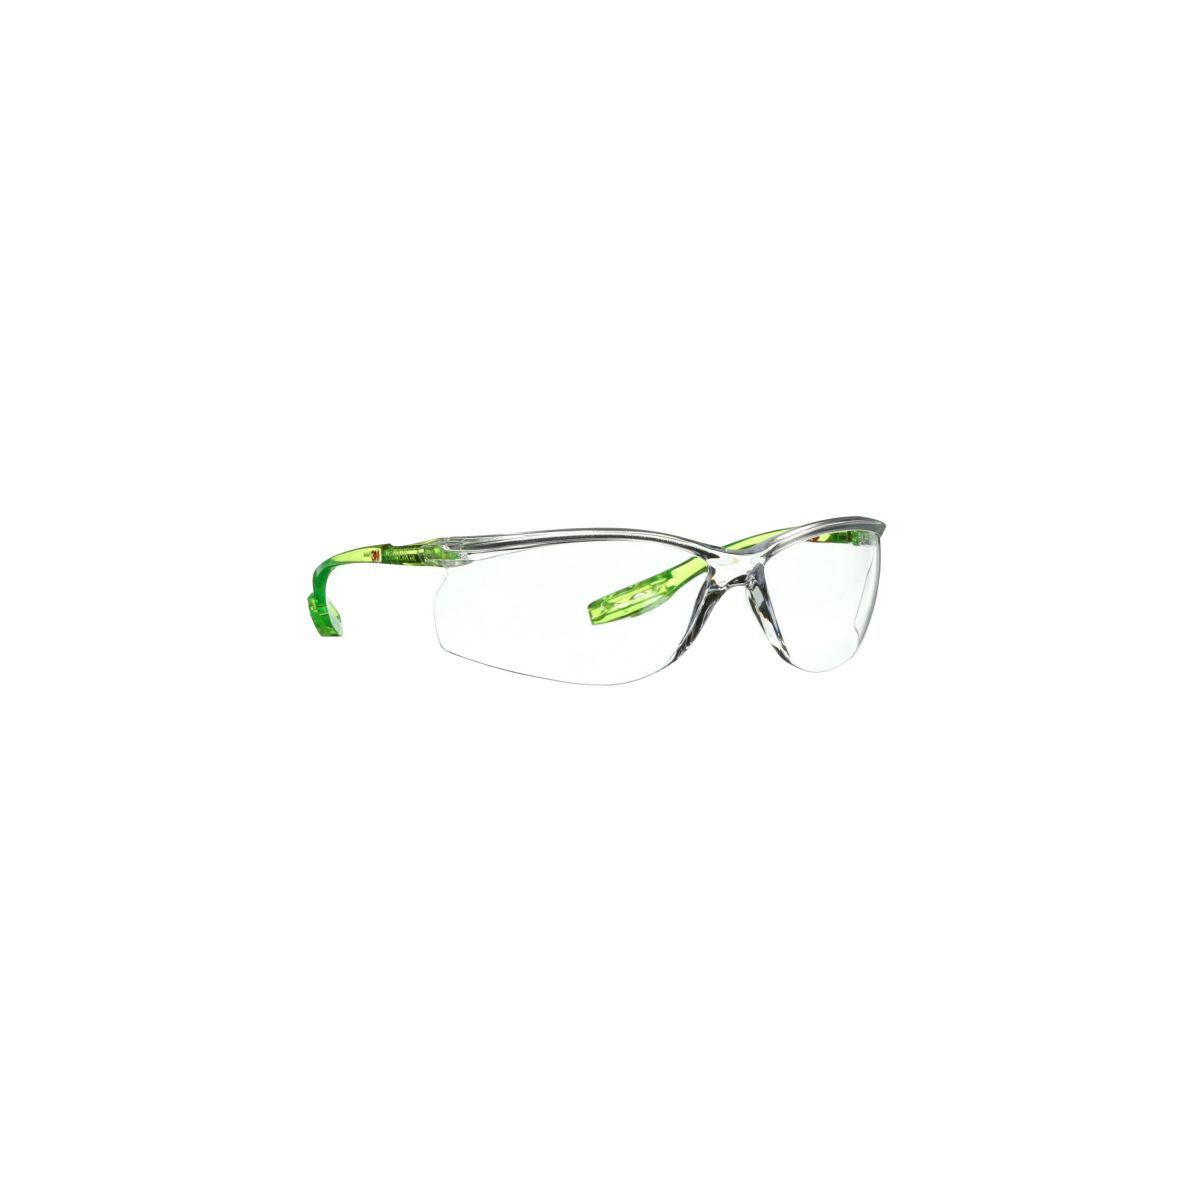 3M™ Solus™ CCS Series Clear And Bright Green Safety Glasses With Clear Scotchgard™ Anti-Fog/Anti-Scratch Lens (Availability rest